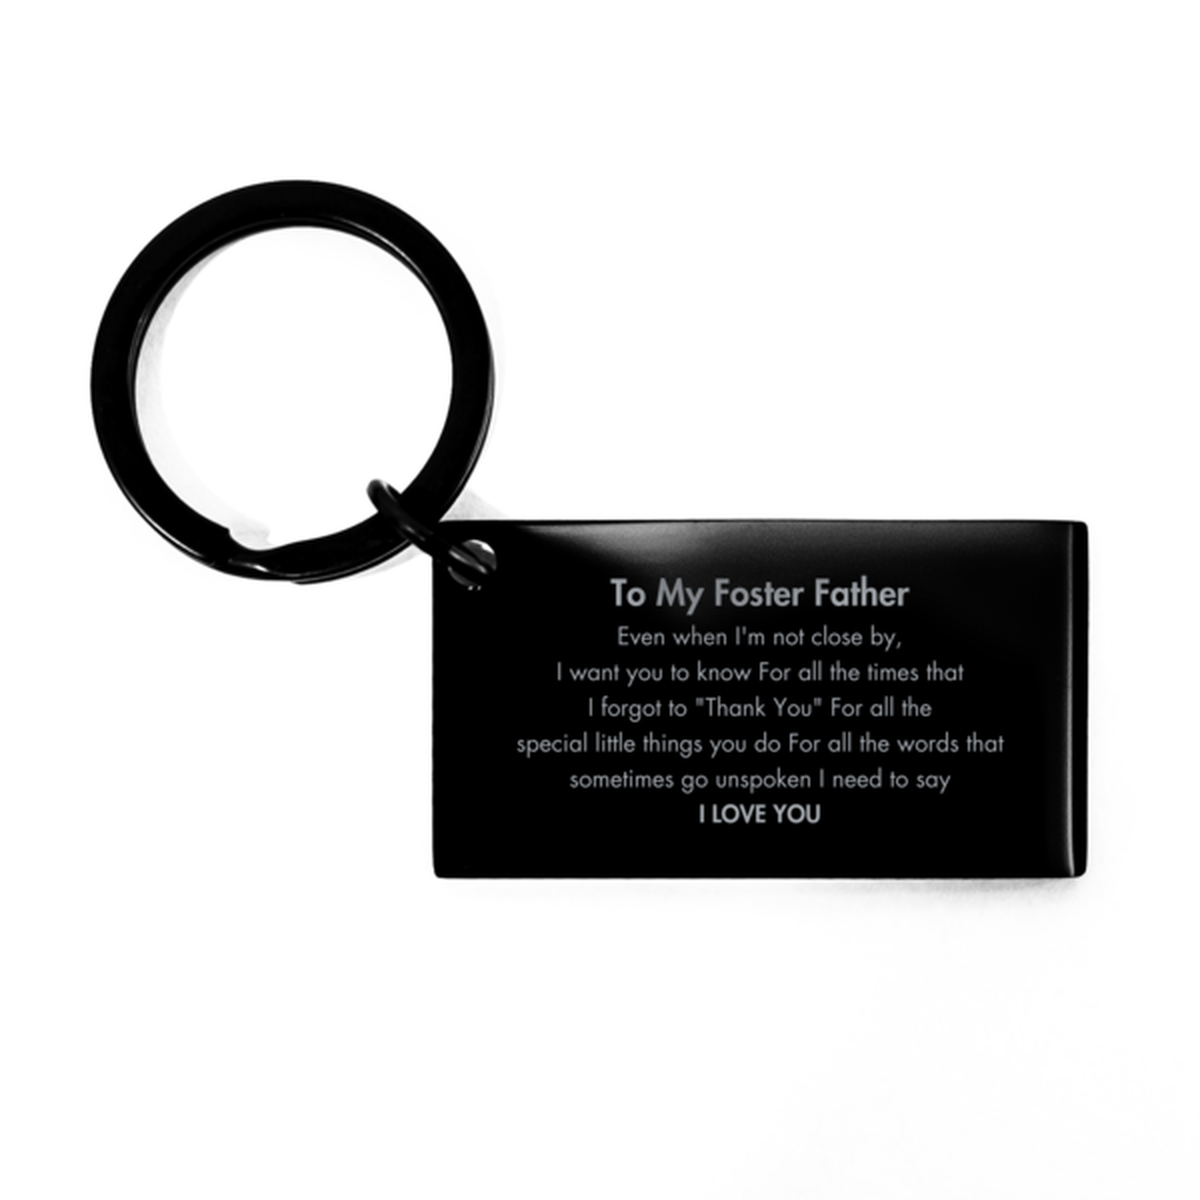 Thank You Gifts for Foster Father, Keepsake Keychain Gifts for Foster Father Birthday Mother's day Father's Day Foster Father For all the words That sometimes go unspoken I need to say I LOVE YOU